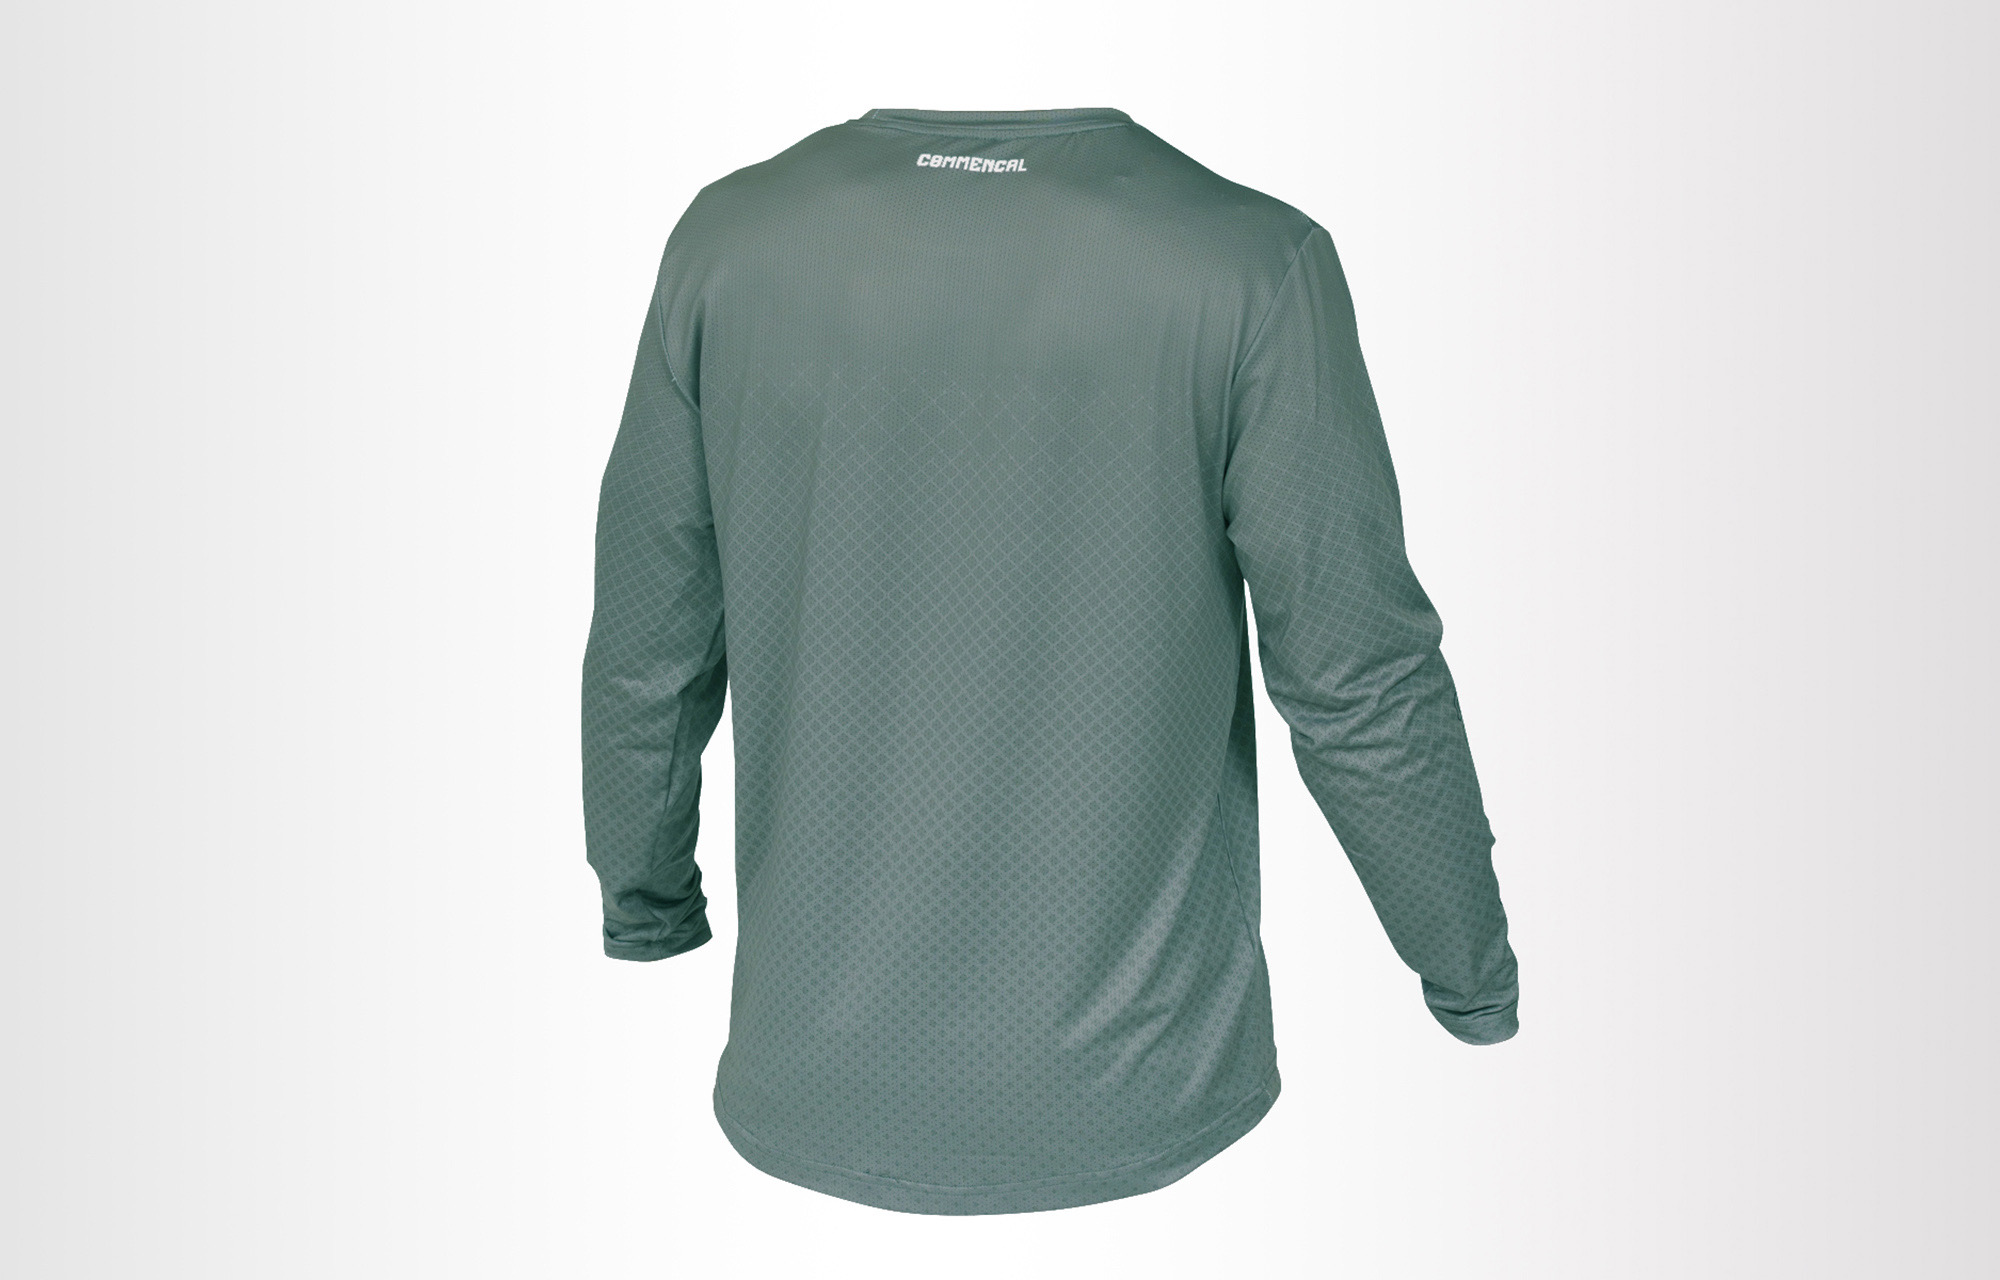 JERSEY MANGAS LARGAS COMMENCAL GREEN image number 0